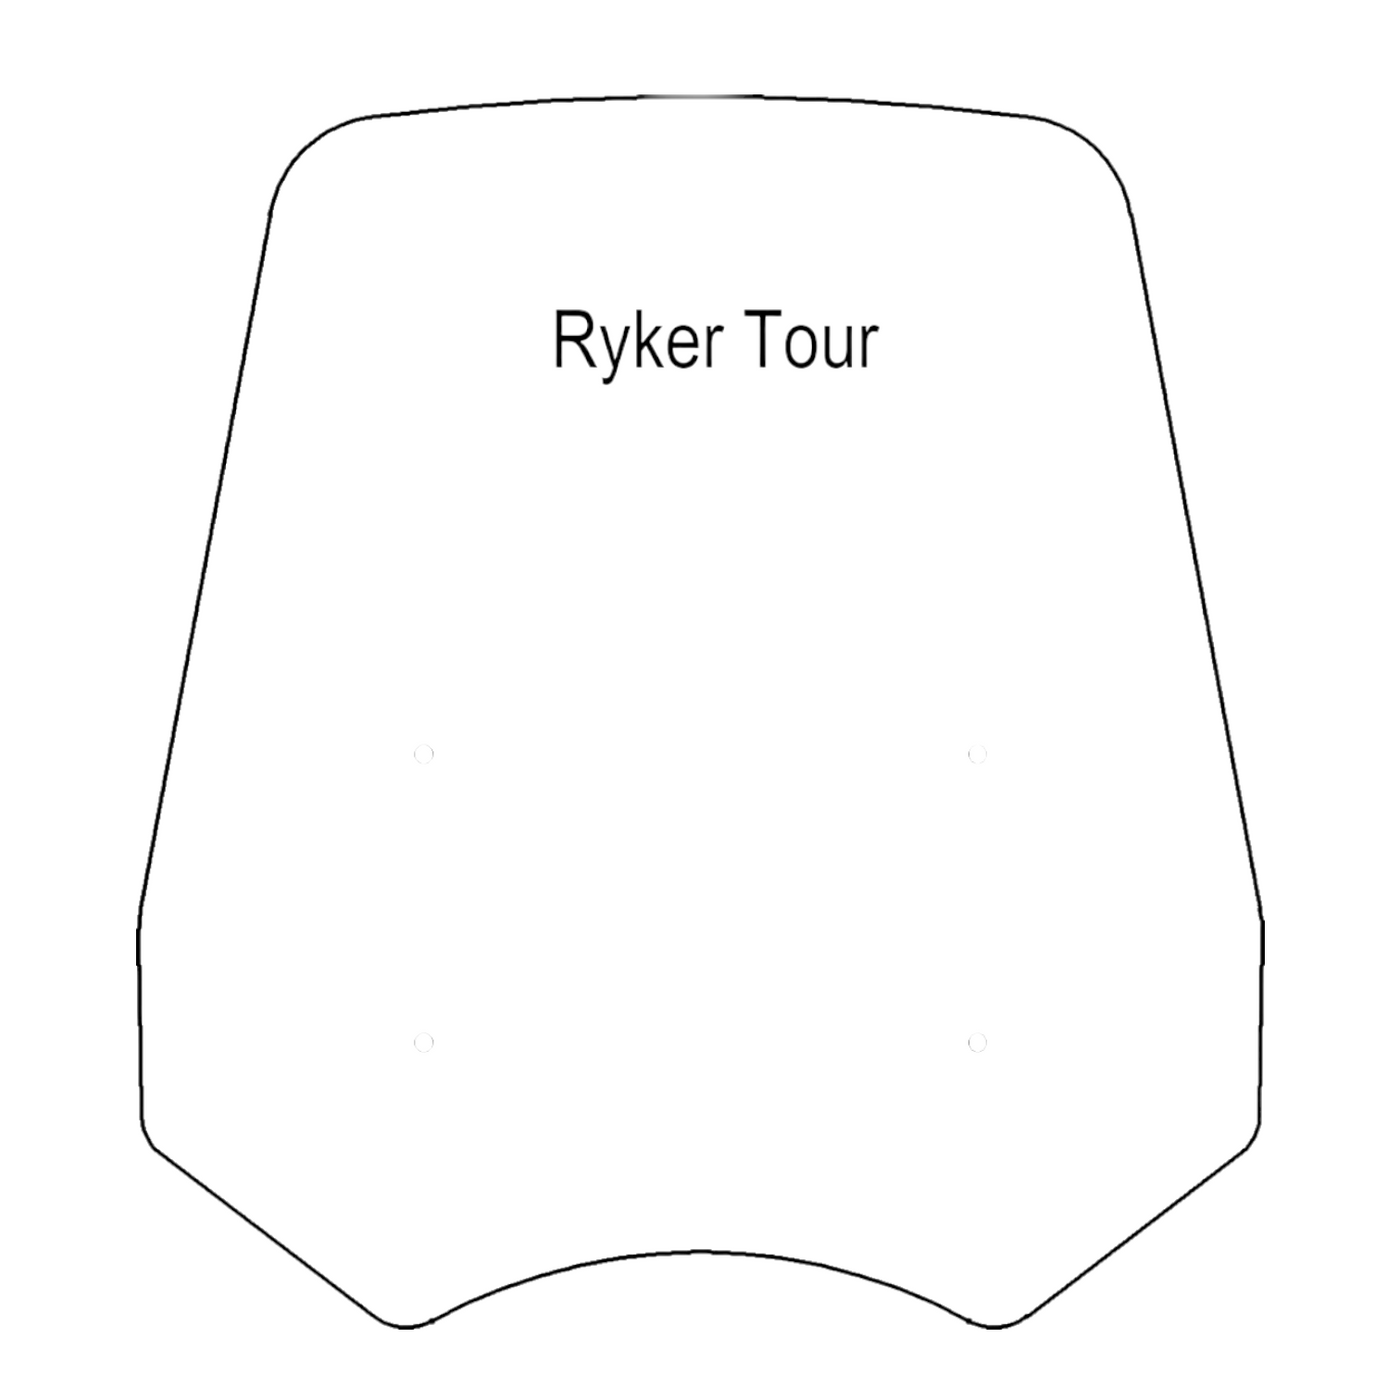 CERTIFIED PRE-OWNED - 22" Dark Grey Replacement Windshield for Madstad System for Can-Am Ryker Touring